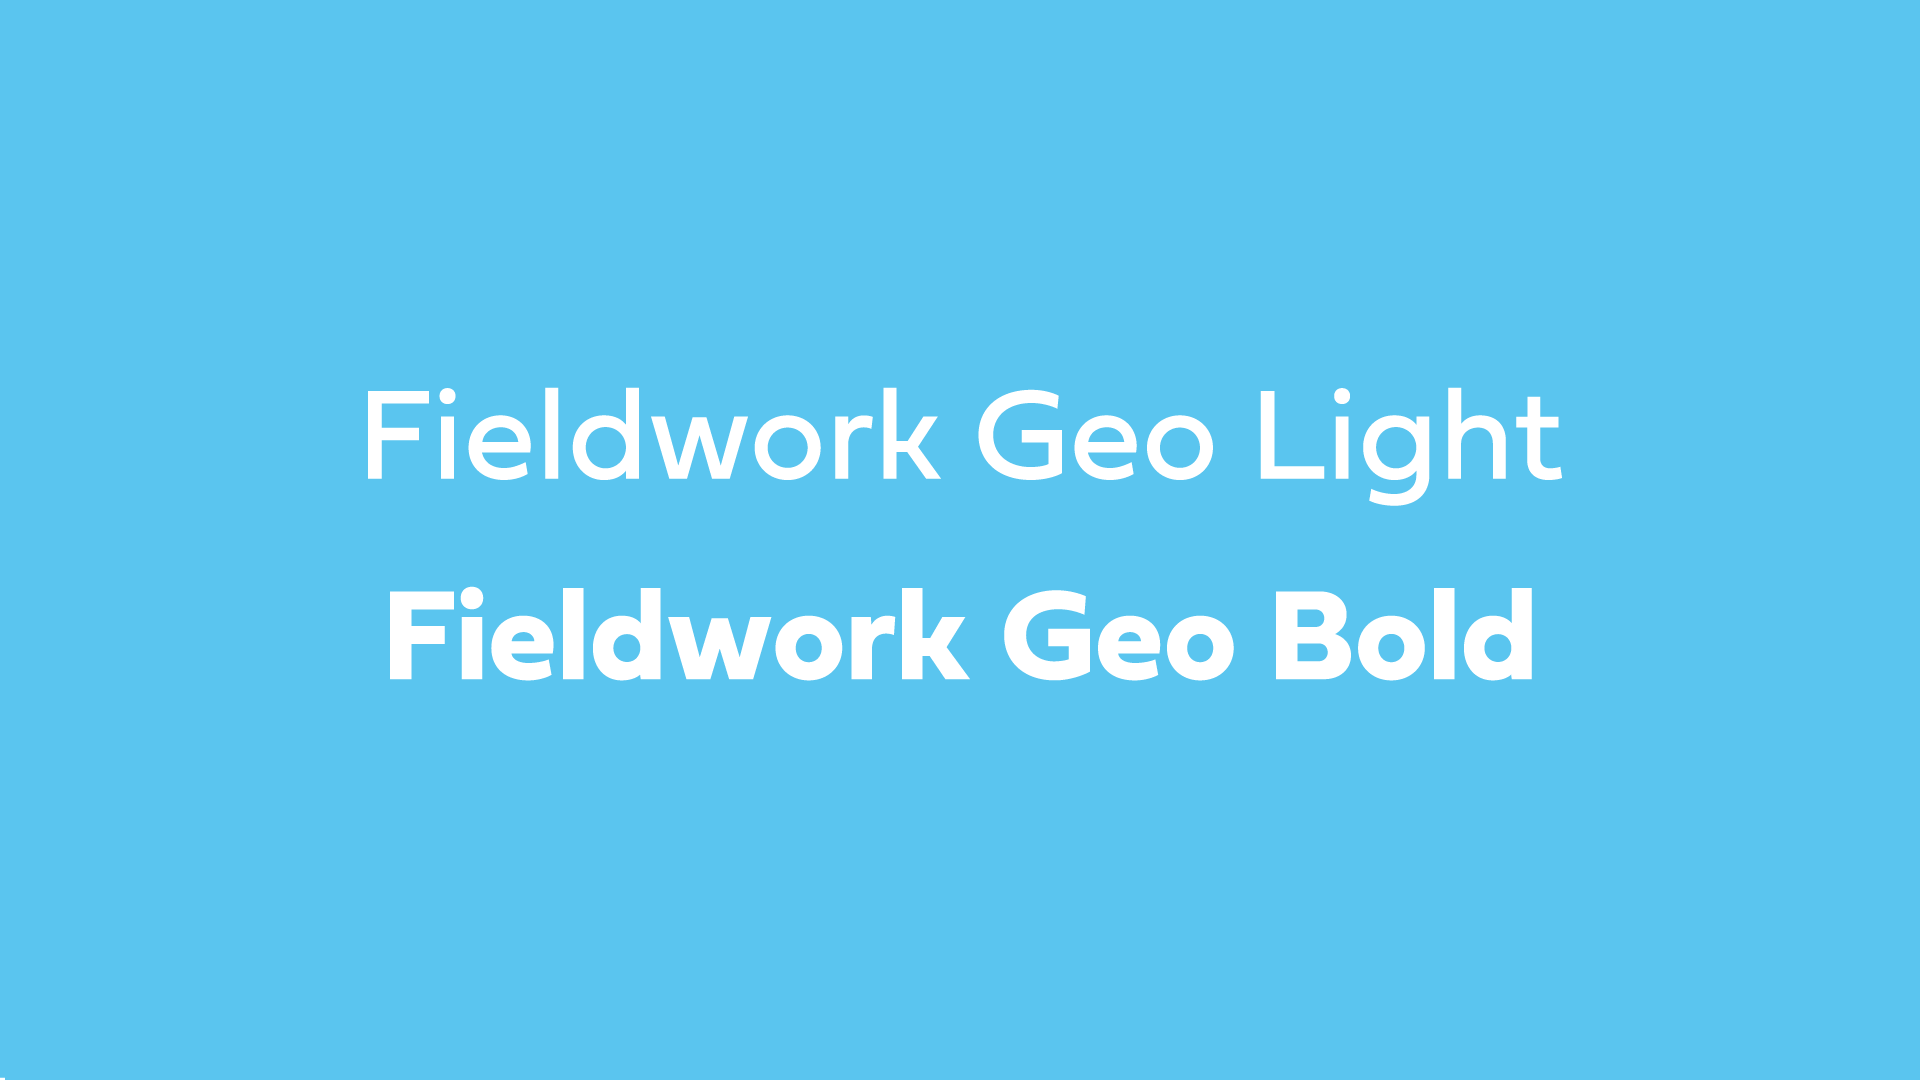 Evolving the brand field work font on blue background